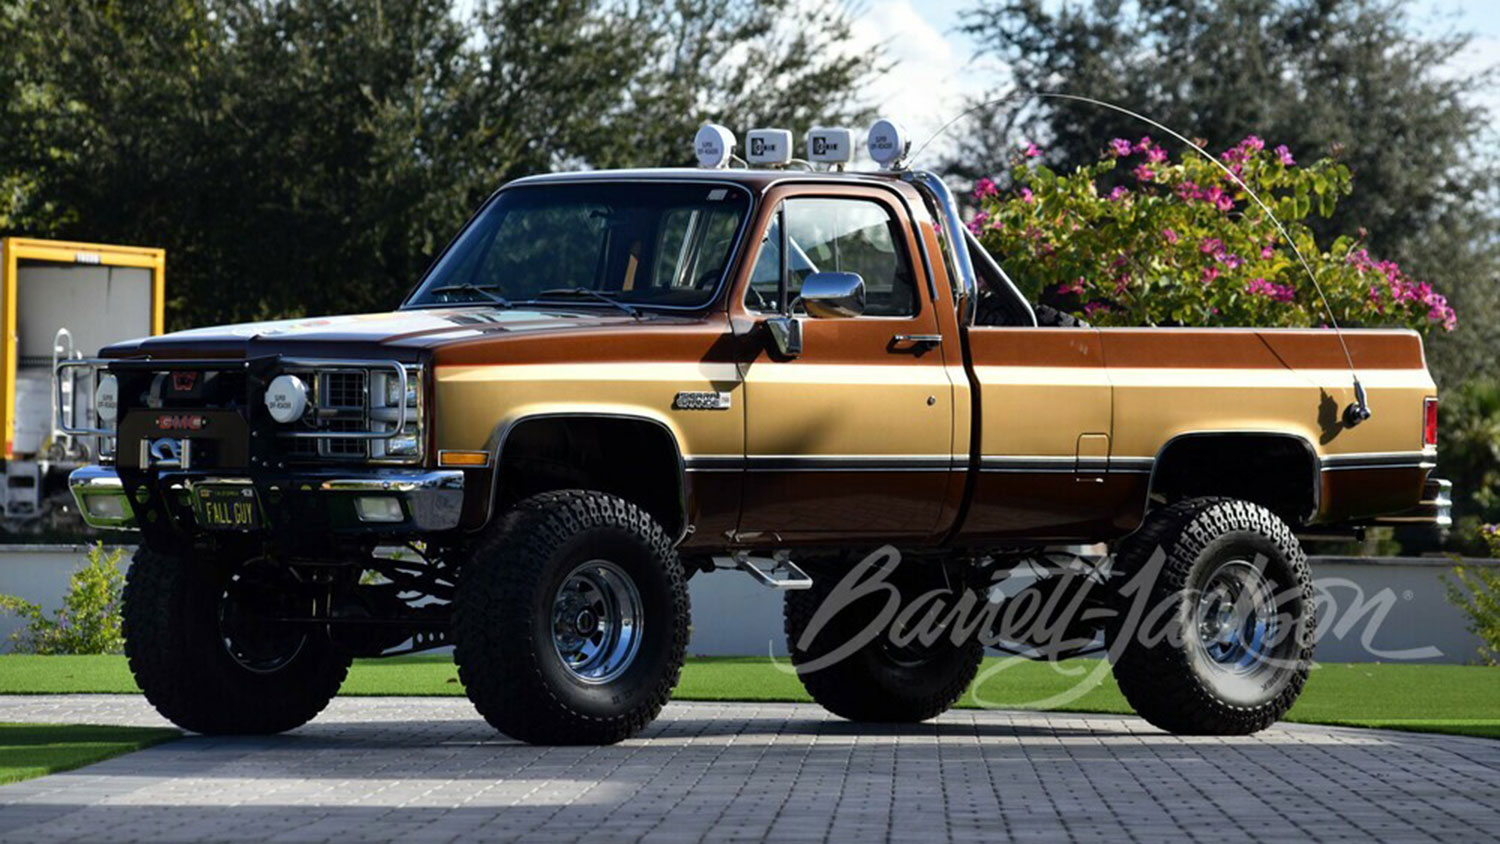 10 Wild Facts About Colt's '82 GMC K-2500 - The Fall Guy 